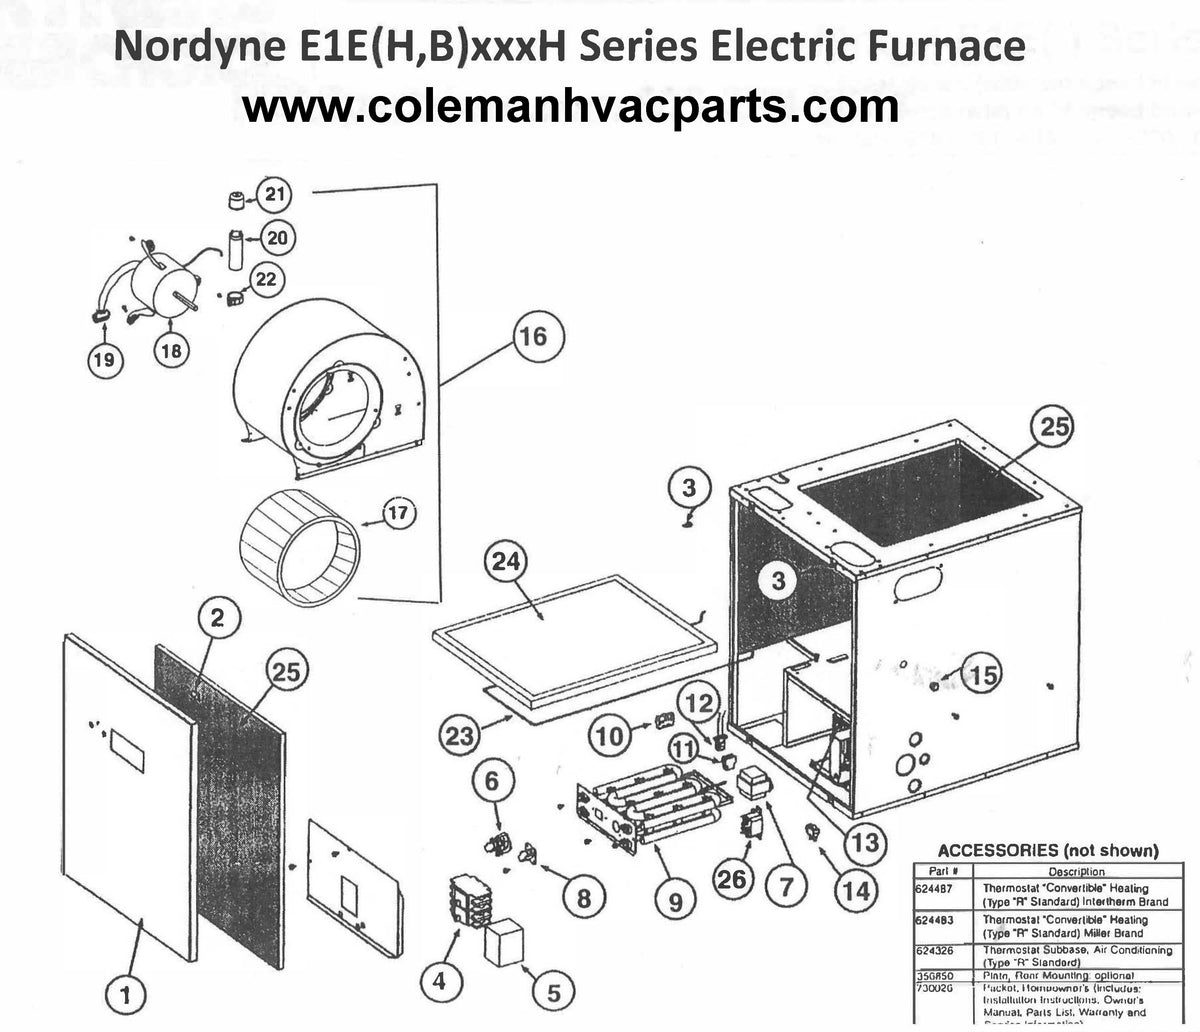 E1EH020H Nordyne Electric Furnace Parts – HVACpartstore electric furnace troubleshooting diagrams 